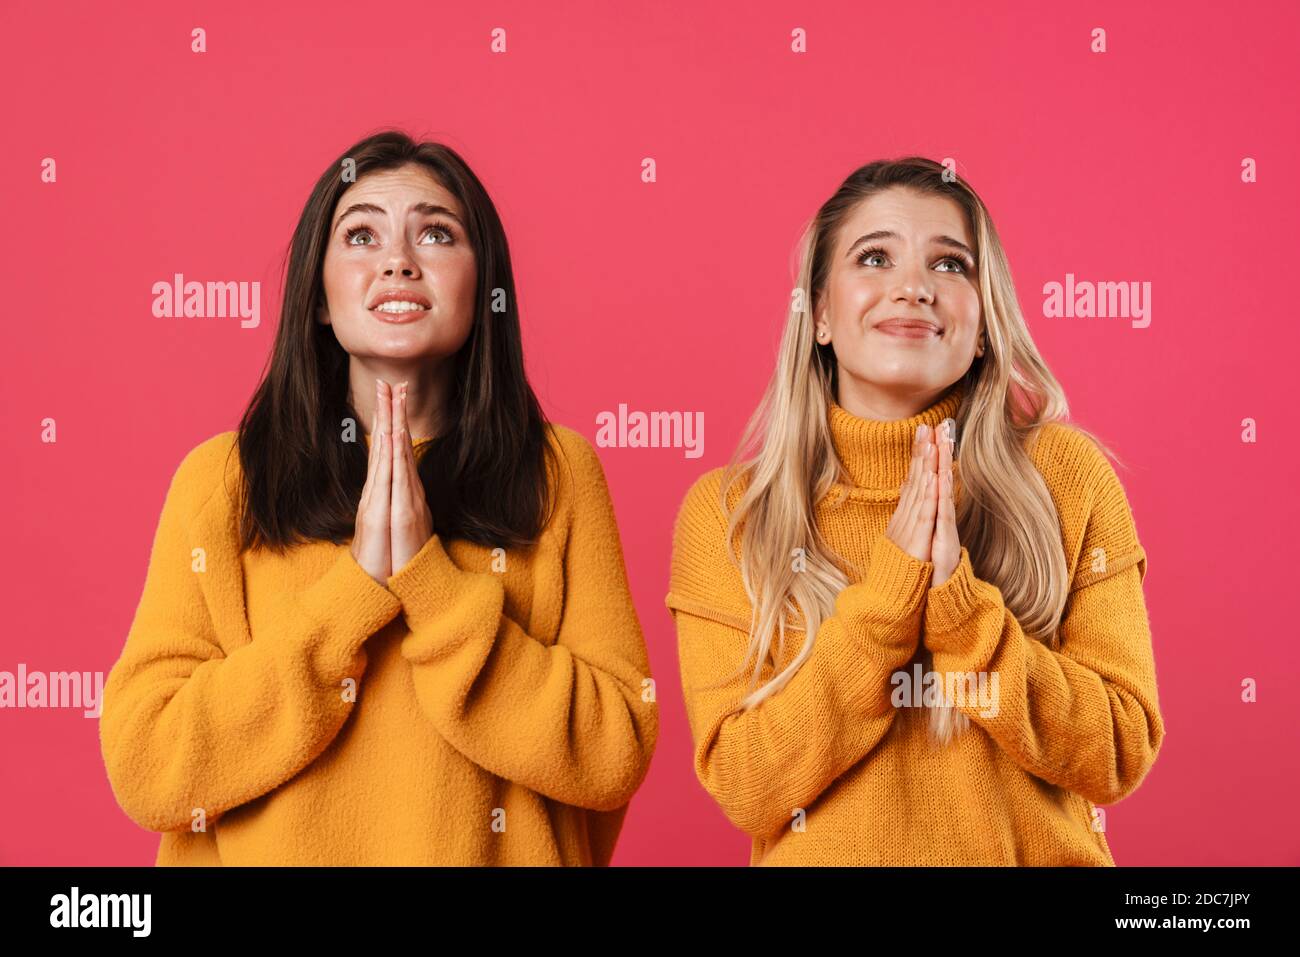 Image of unhappy caucasian women holding palms together and looking upward isolated over pink background Stock Photo